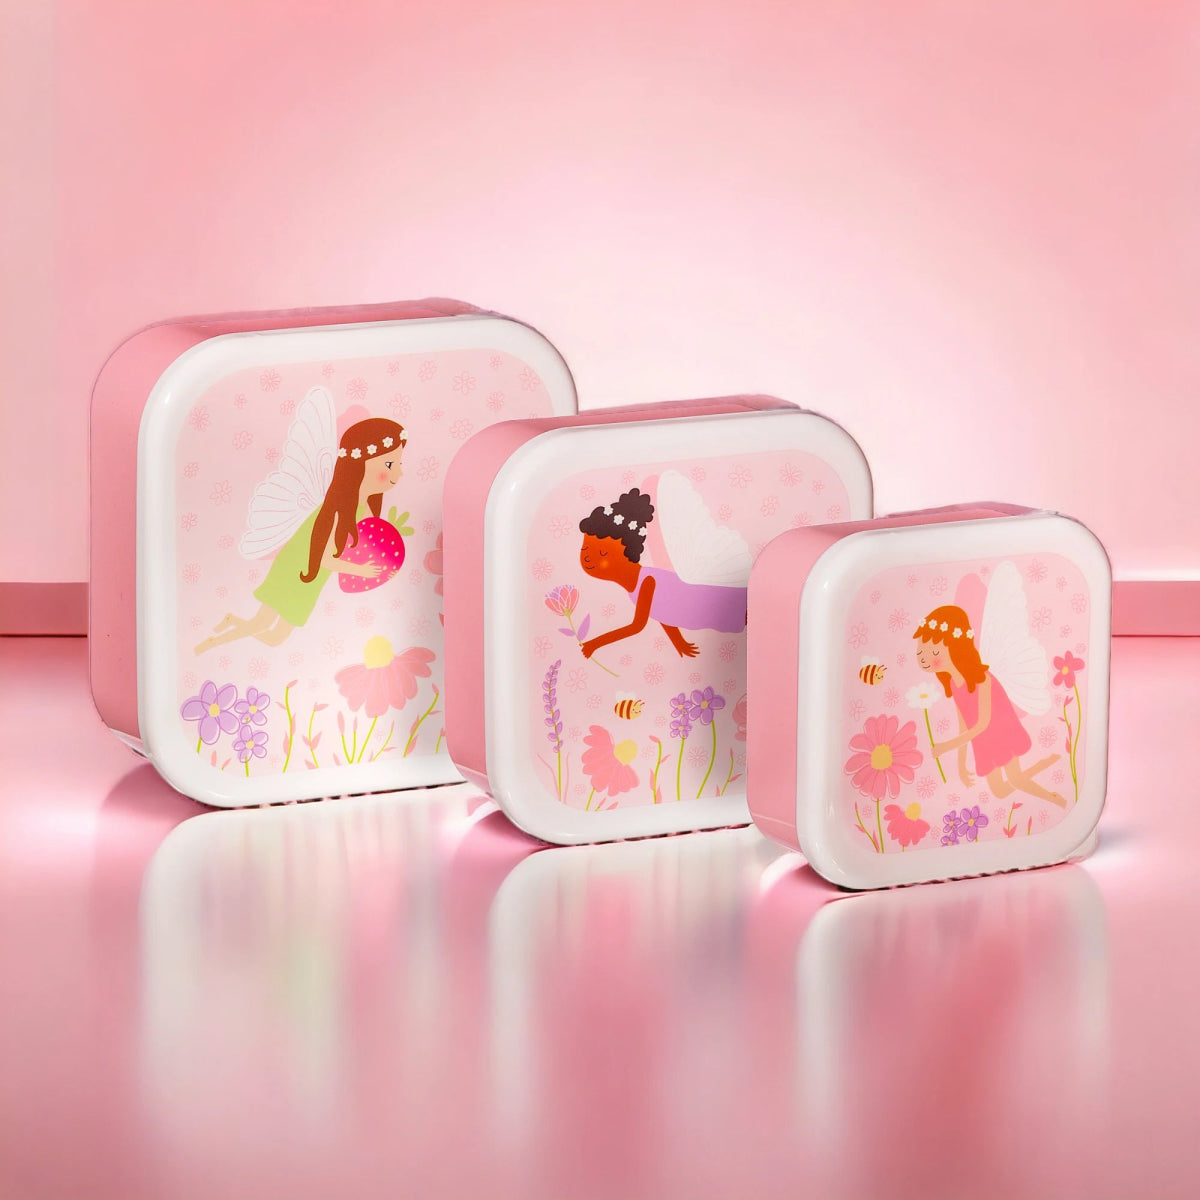 Fairy Lunch Boxes - Set of 3 - Lunch Boxes by Sass & Belle